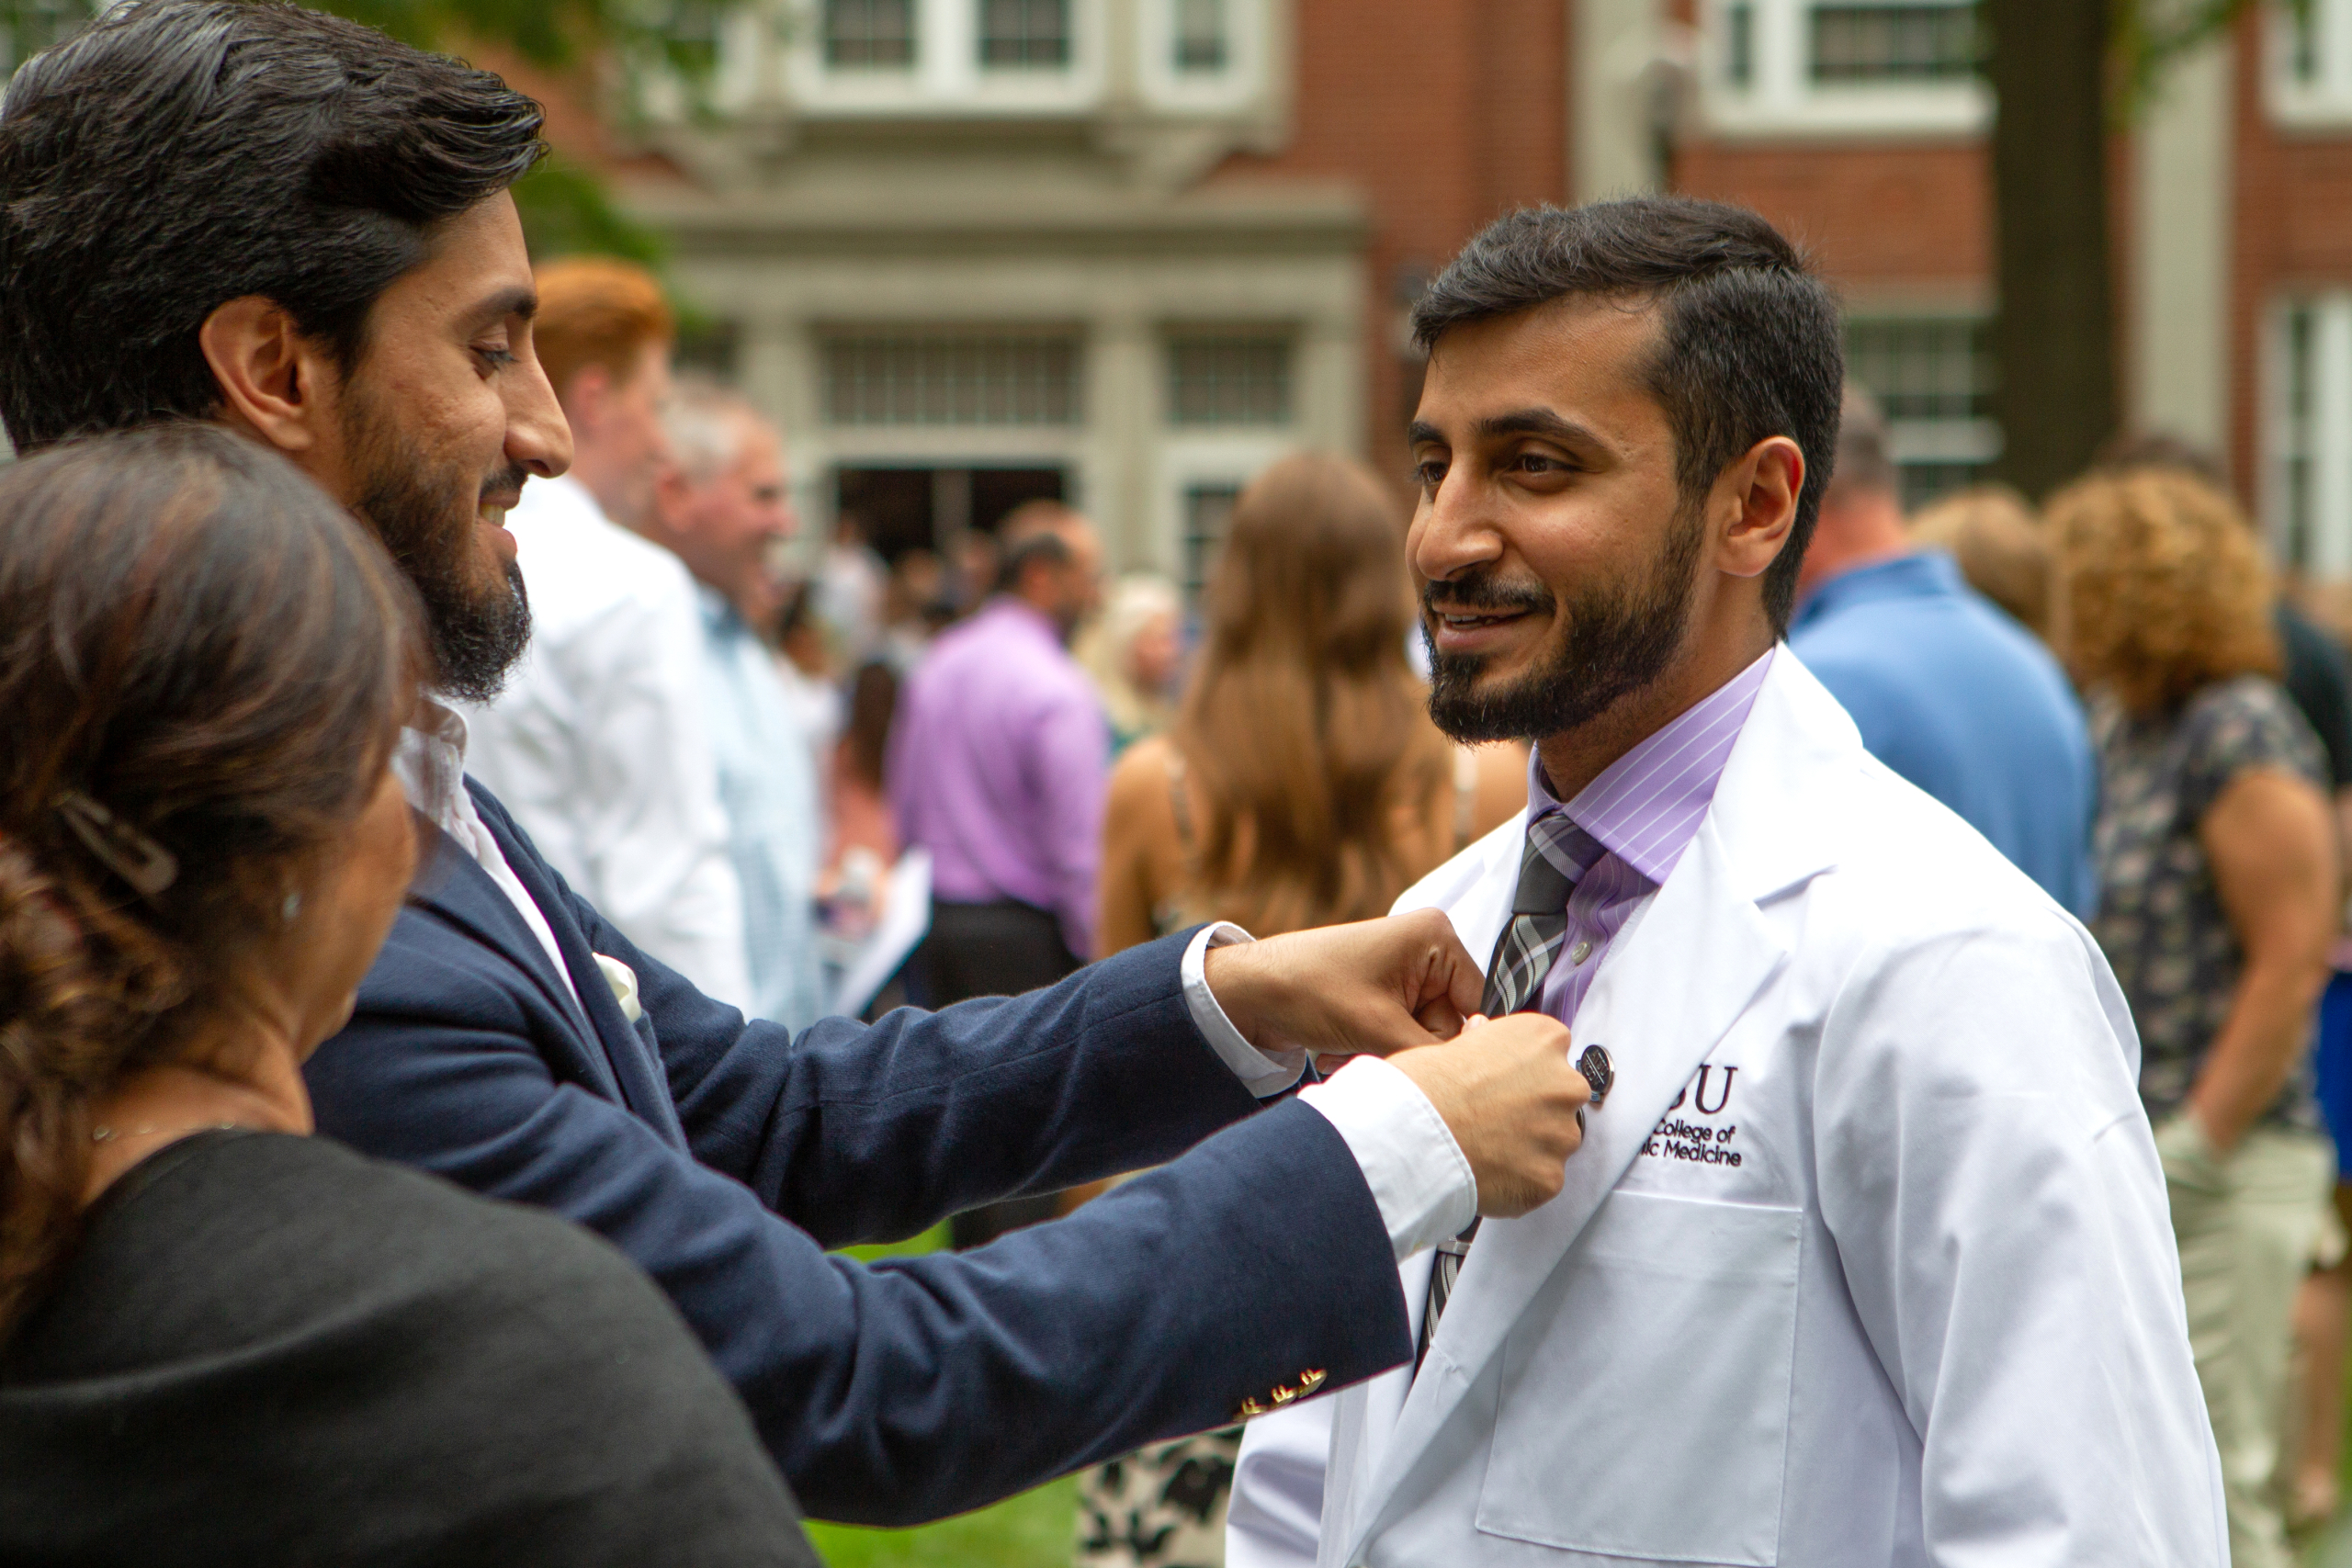 An ATSU-KCOM student has his tie straightened by a family member after the White Coat Ceremony.